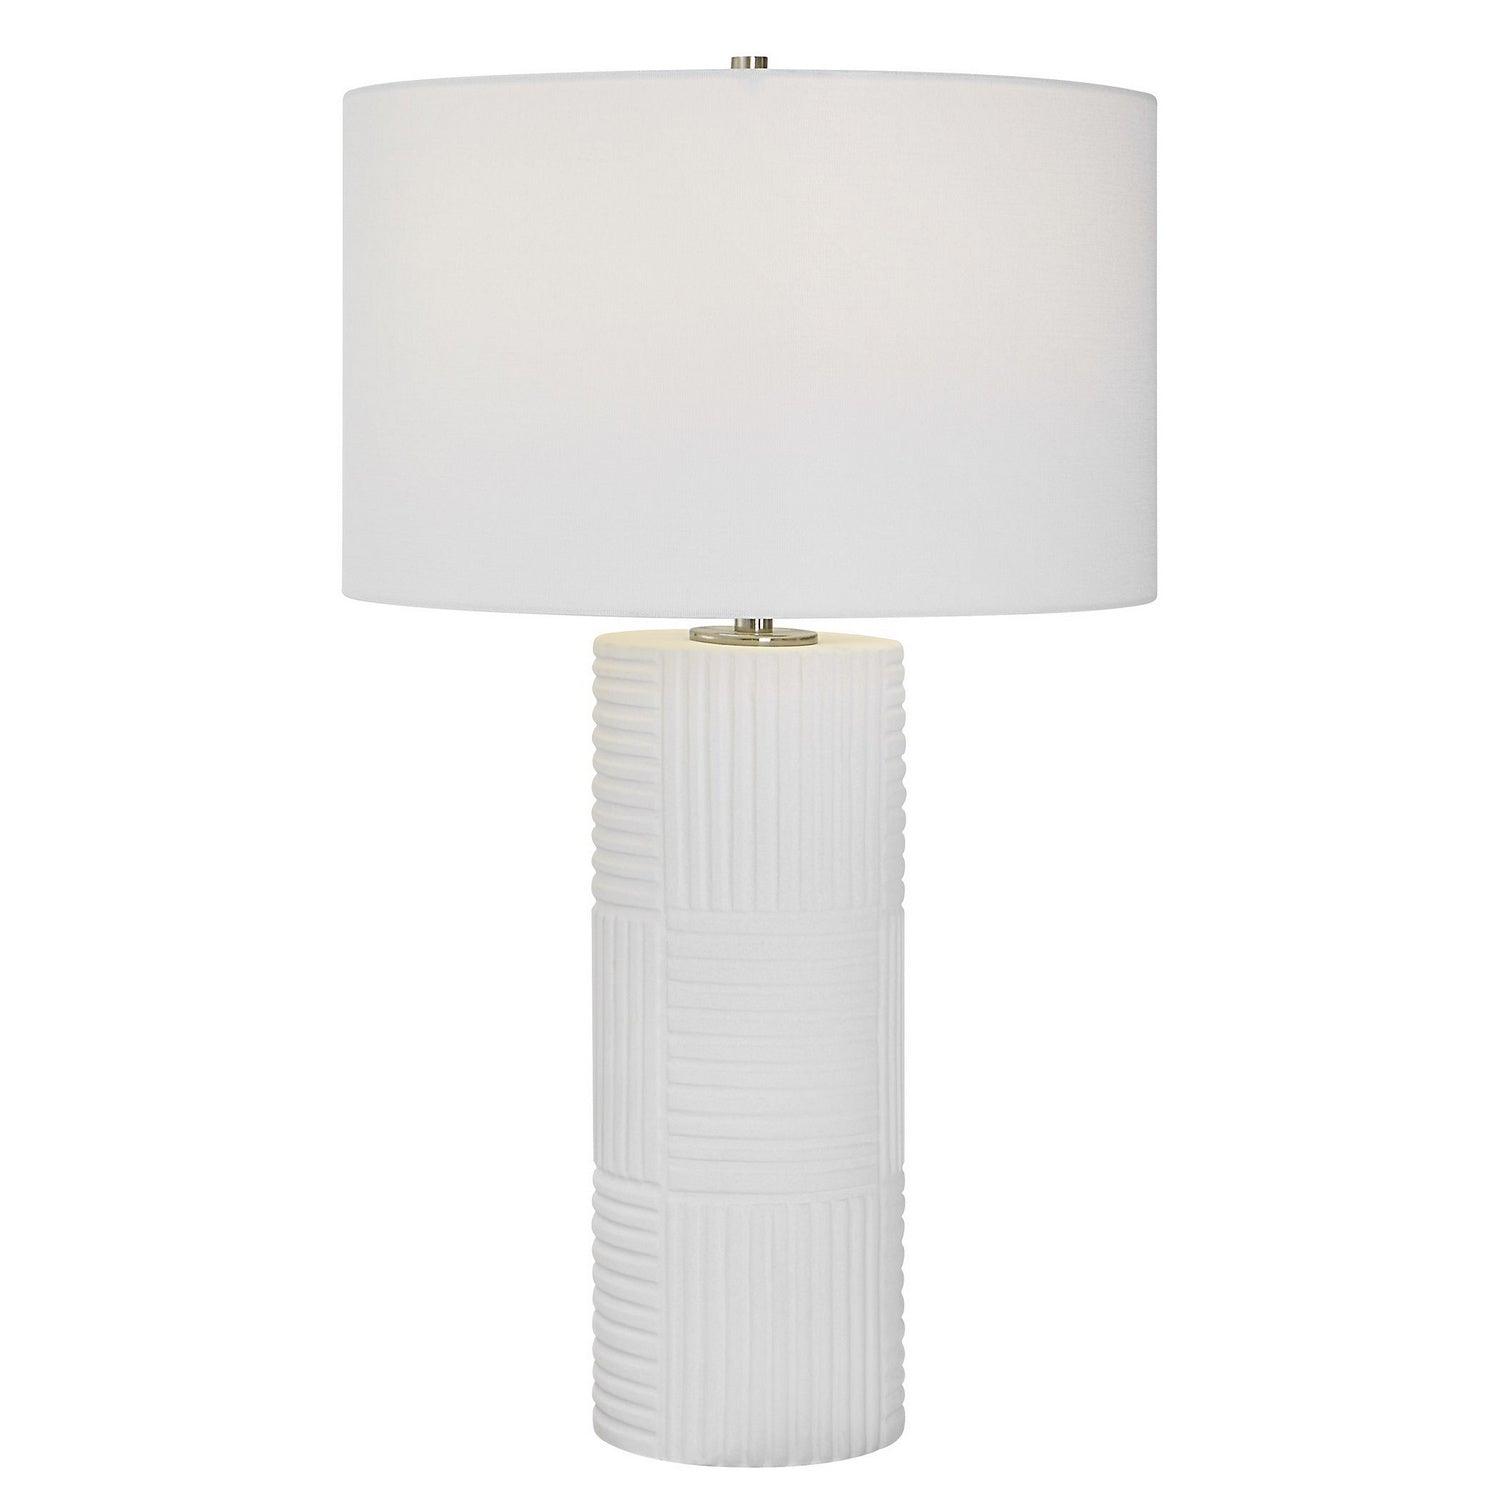 The Uttermost - Patchwork Table Lamp - 30068 | Montreal Lighting & Hardware